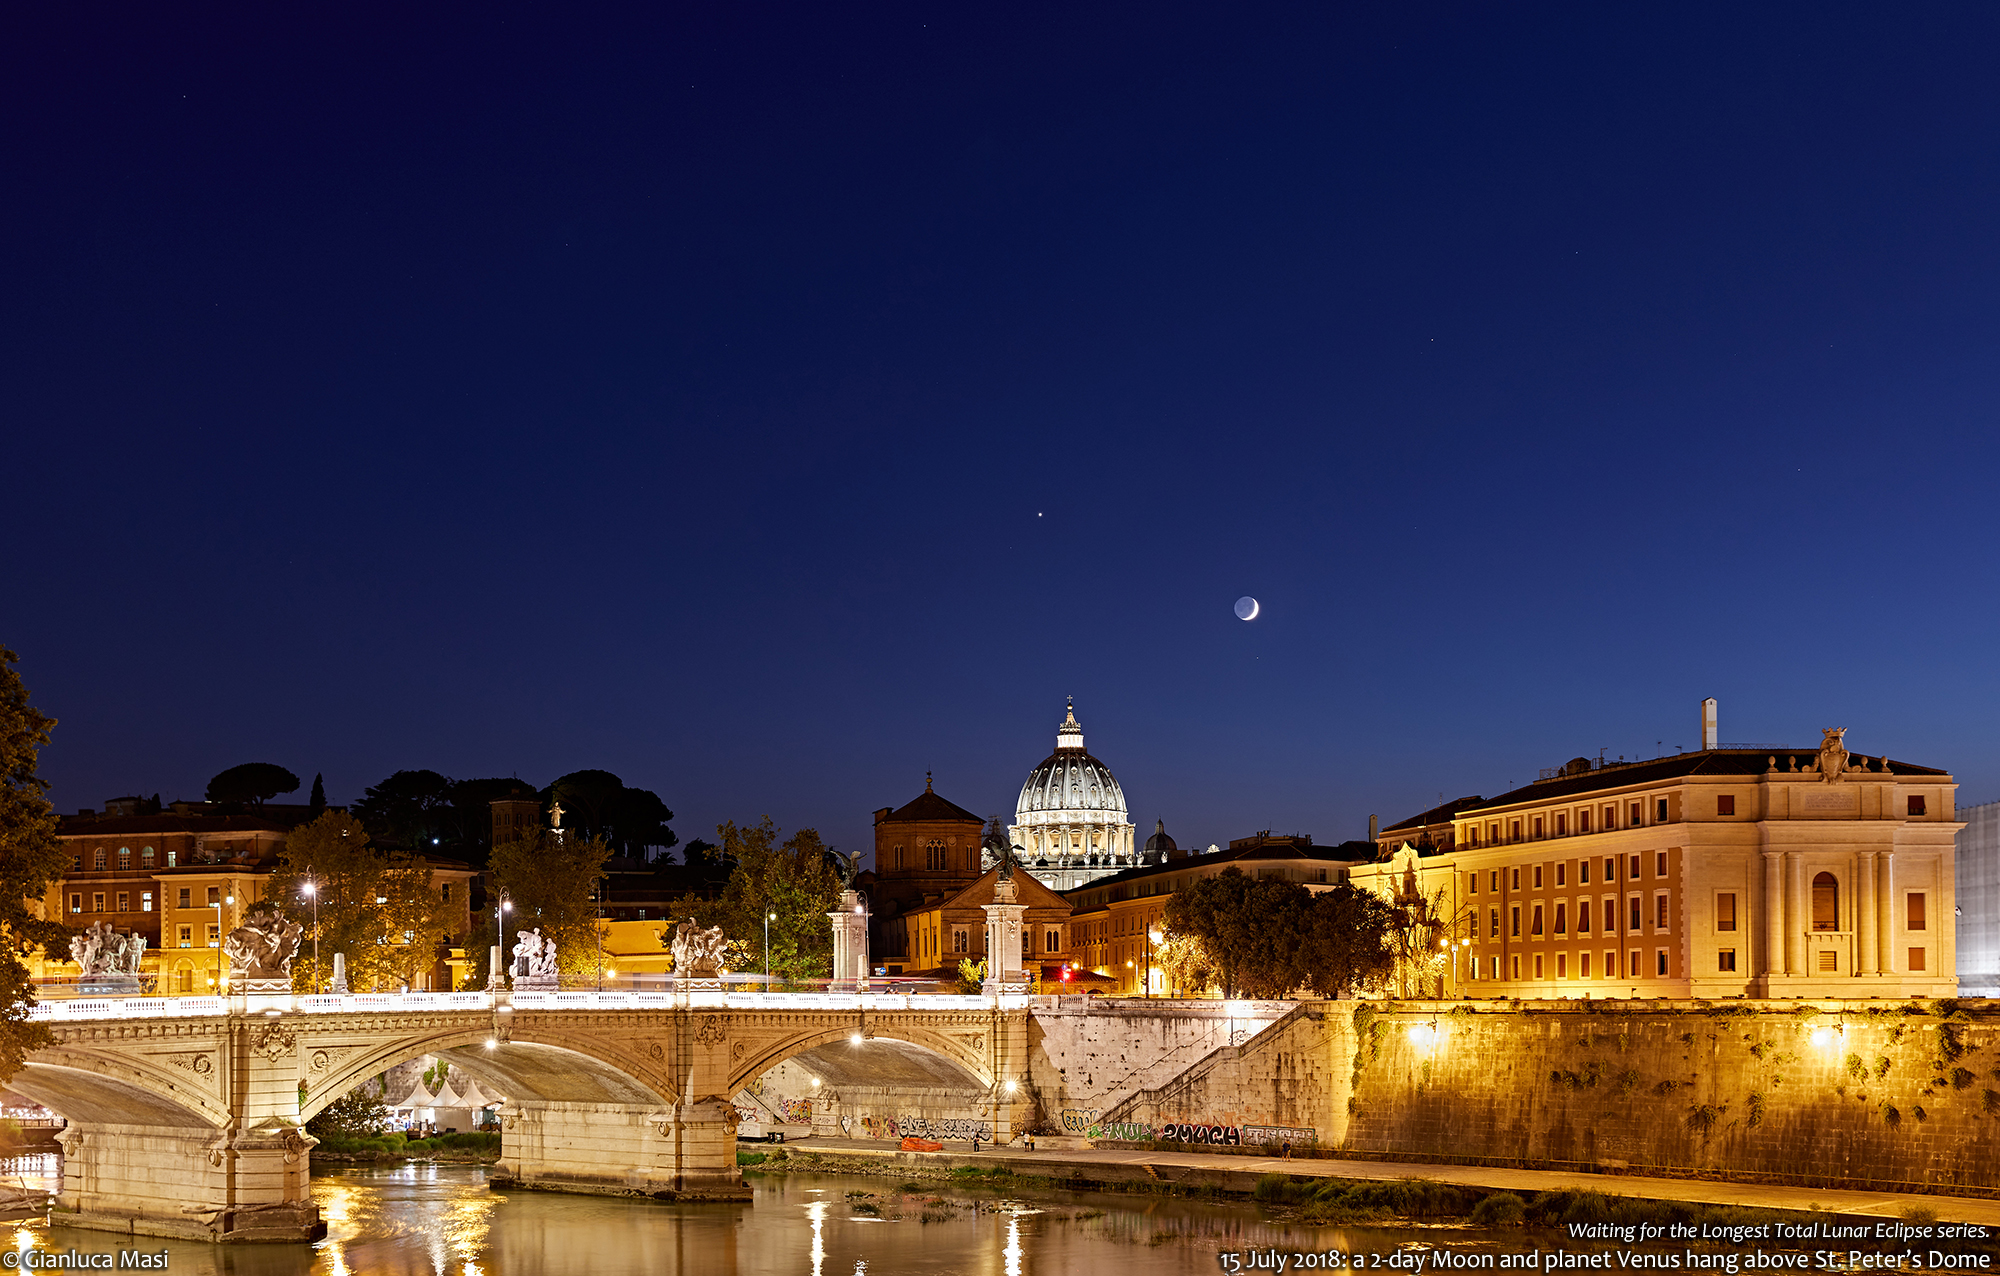 The Moon and Venus put their show above St. Peter's Dome and the Tiber river in Rome - 15 July 2018